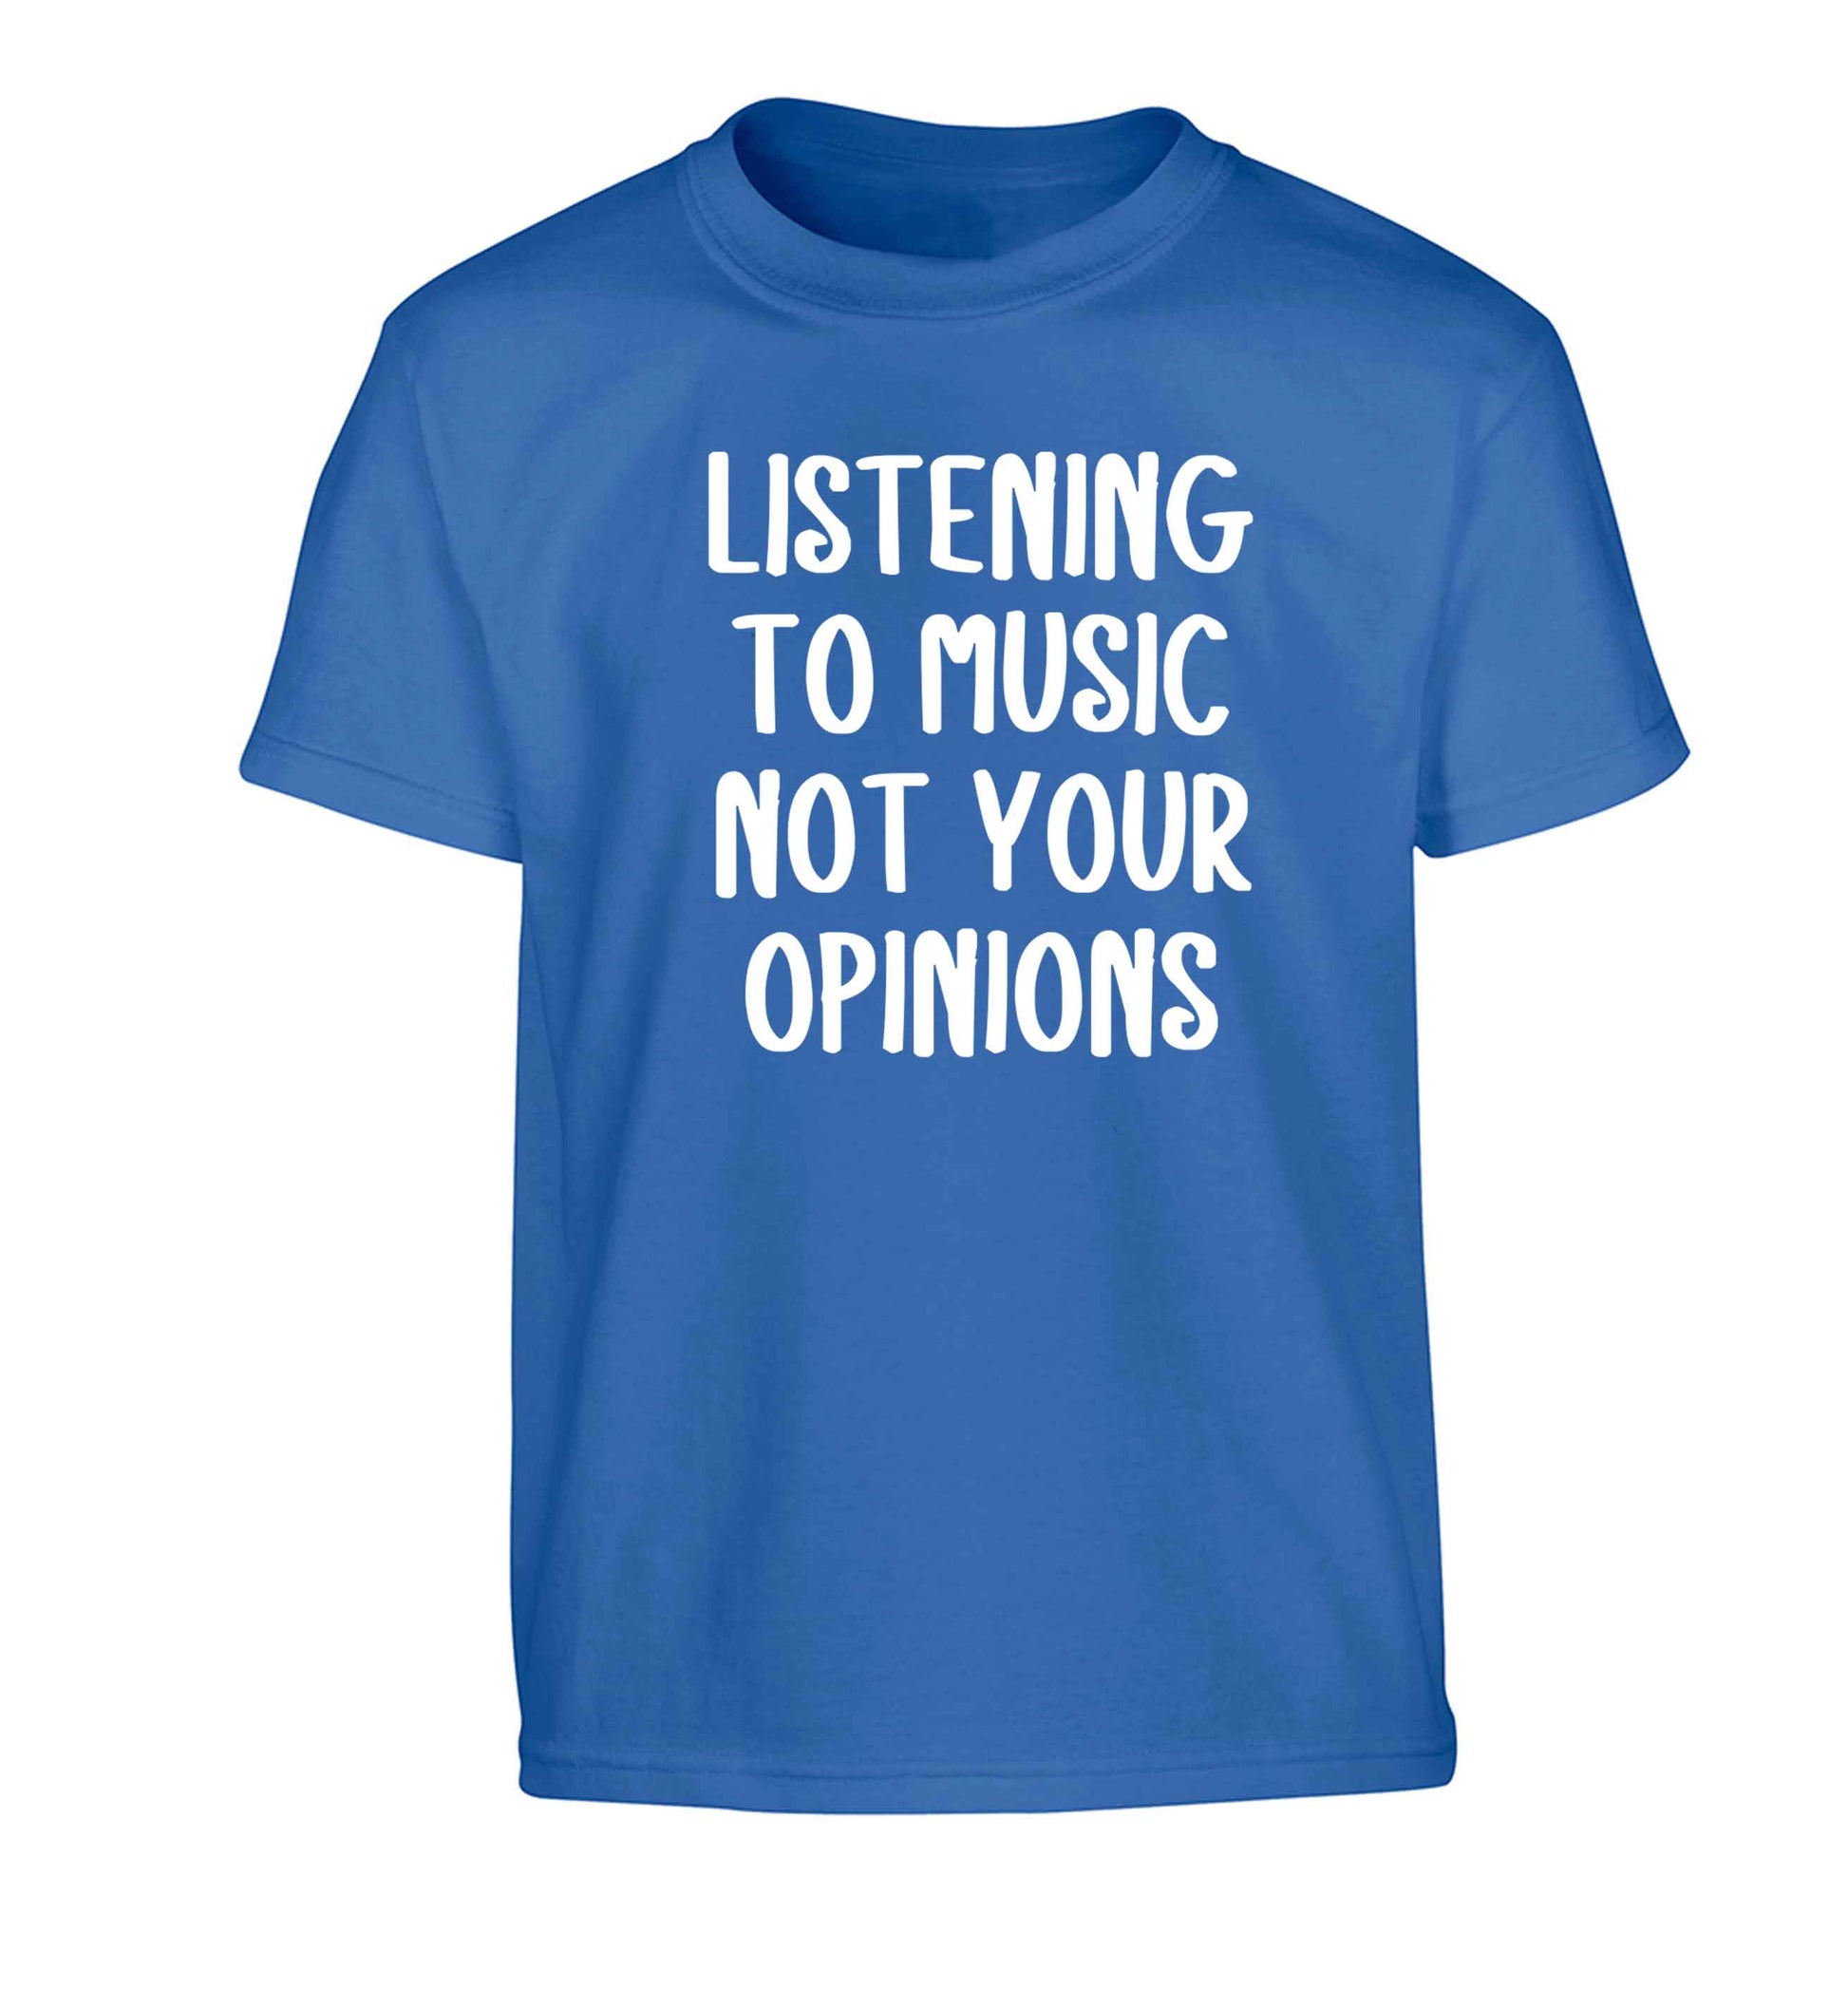 Listening to music not your opinions Children's blue Tshirt 12-13 Years